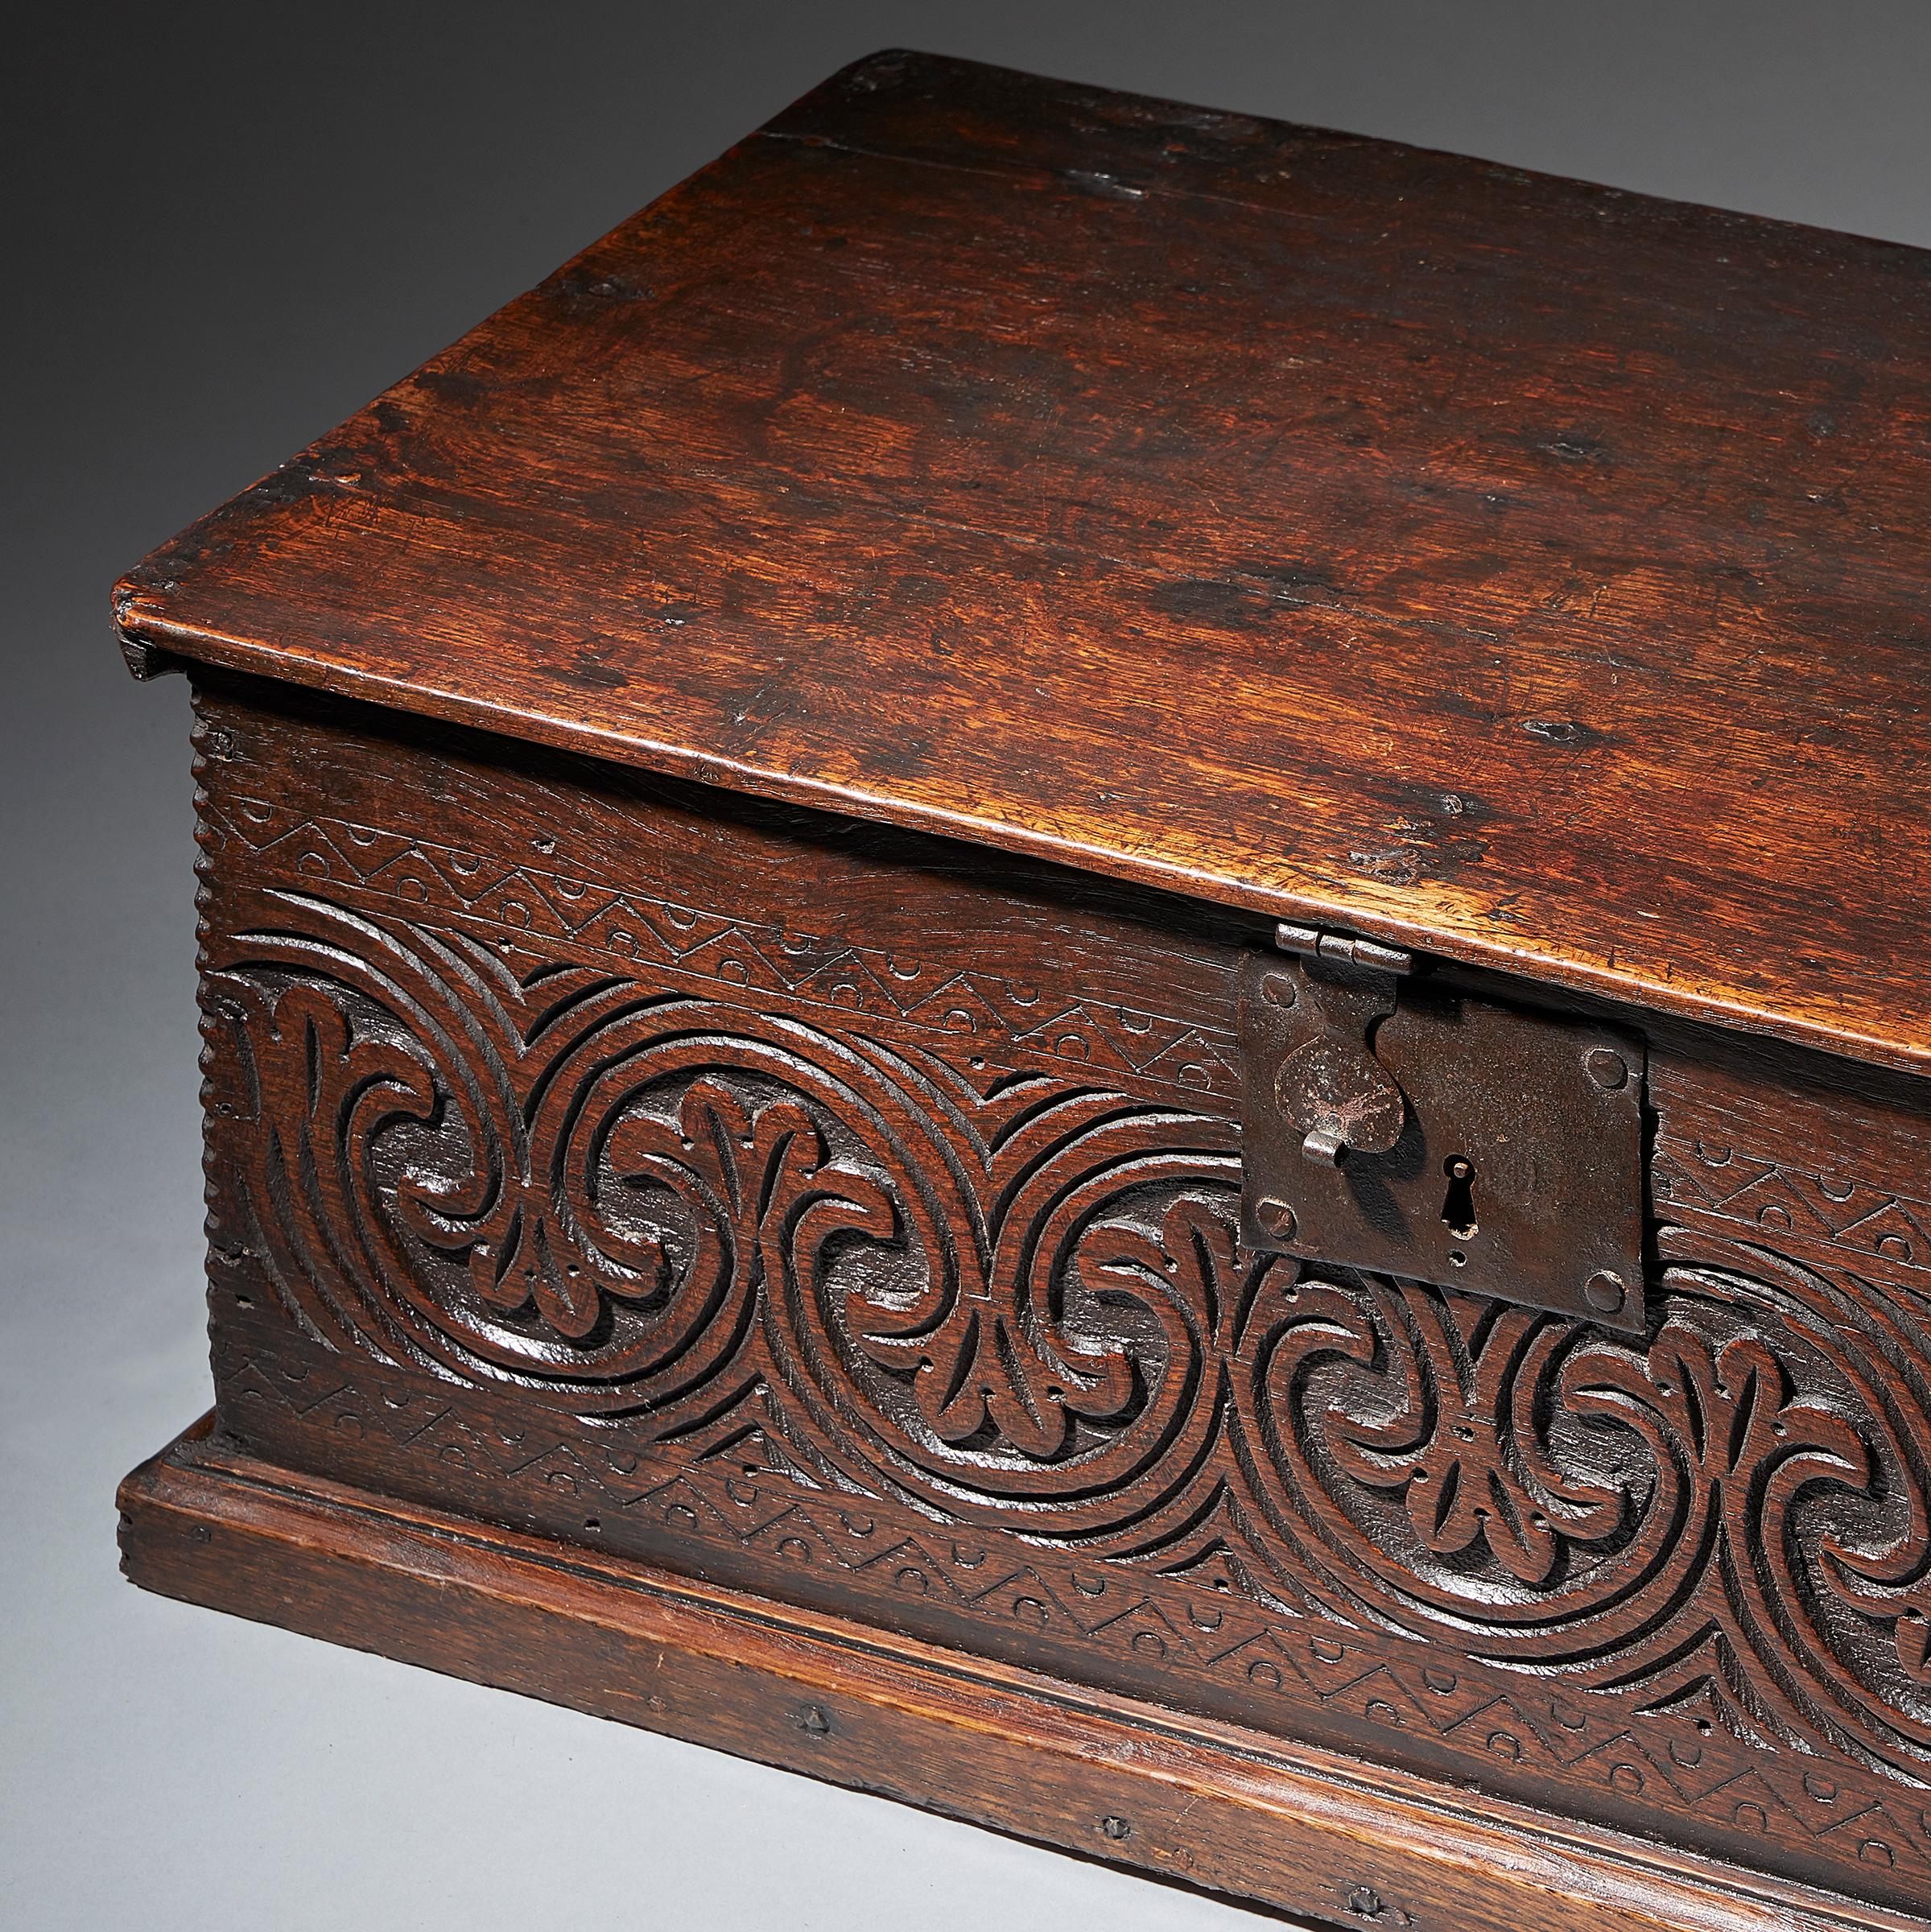 A superb and original late 17th century oak box with excellent and deep lunette carving and well-patinated surfaces throughout, circa 1670-1680. 

Boxes of this small size are rare and rarer still in original condition, including shaped iron strap